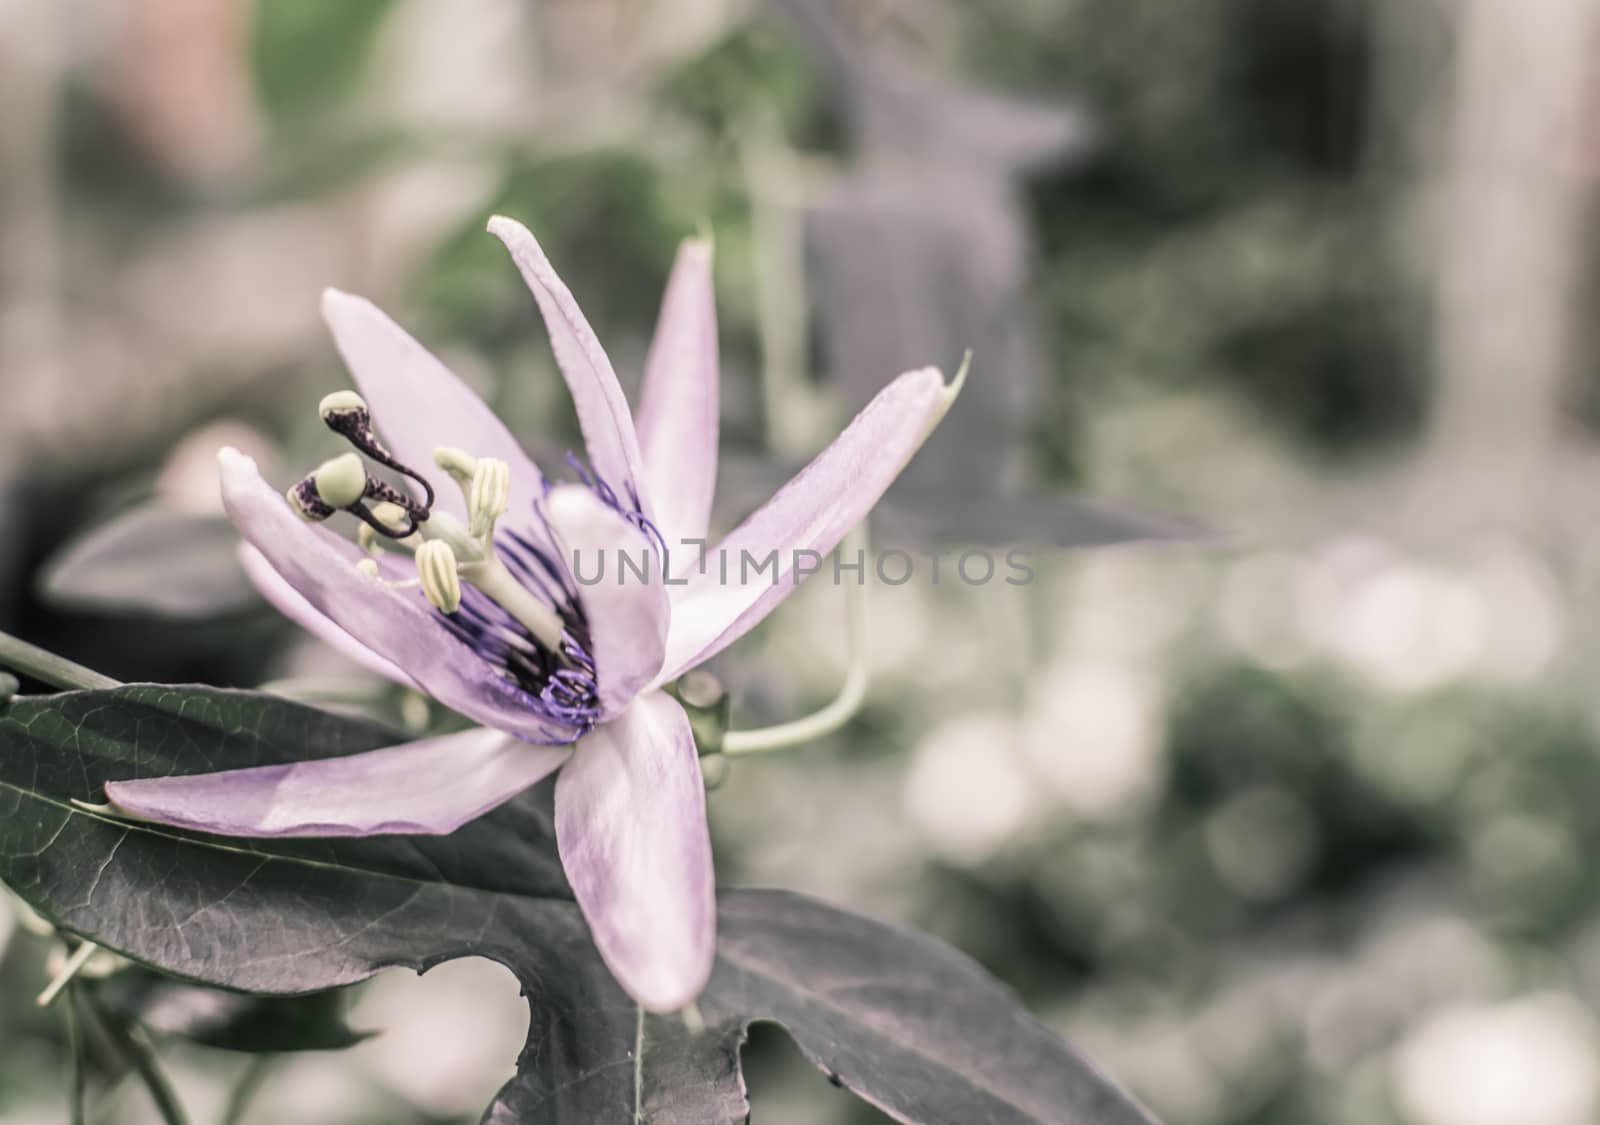 Passion Flower, passiflora incarnata blossoming in a garden. Romantic vintage filter treatment.